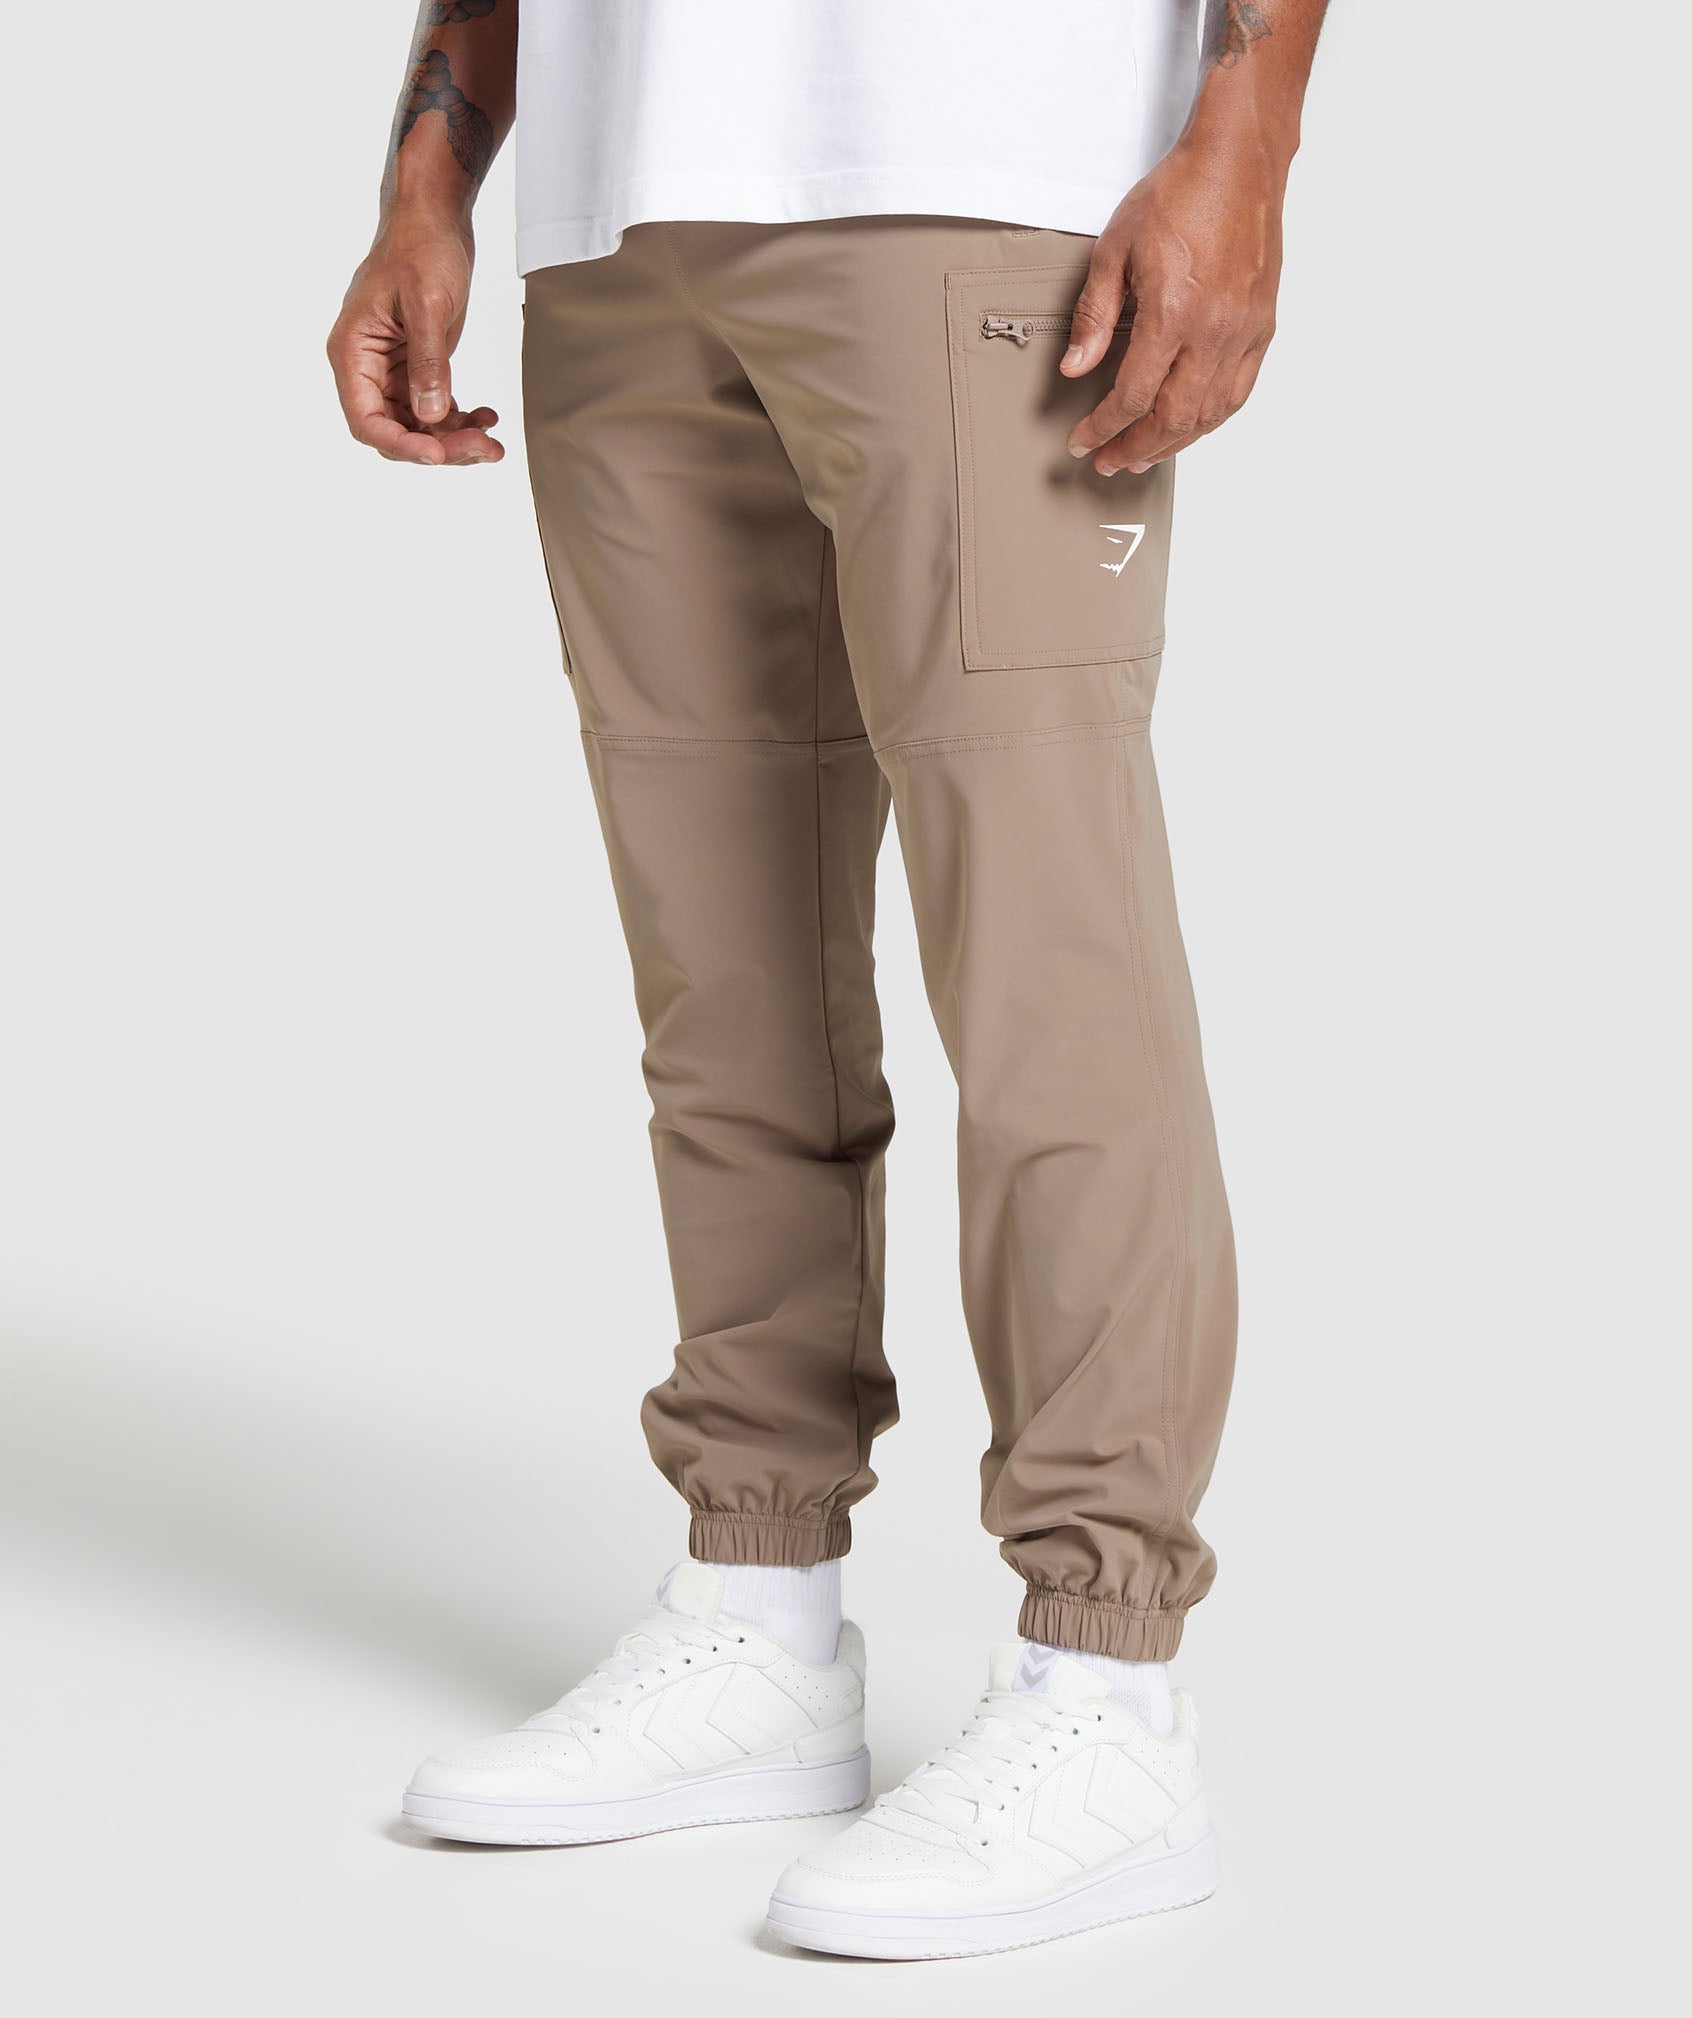 Rest Day Cargo Pants